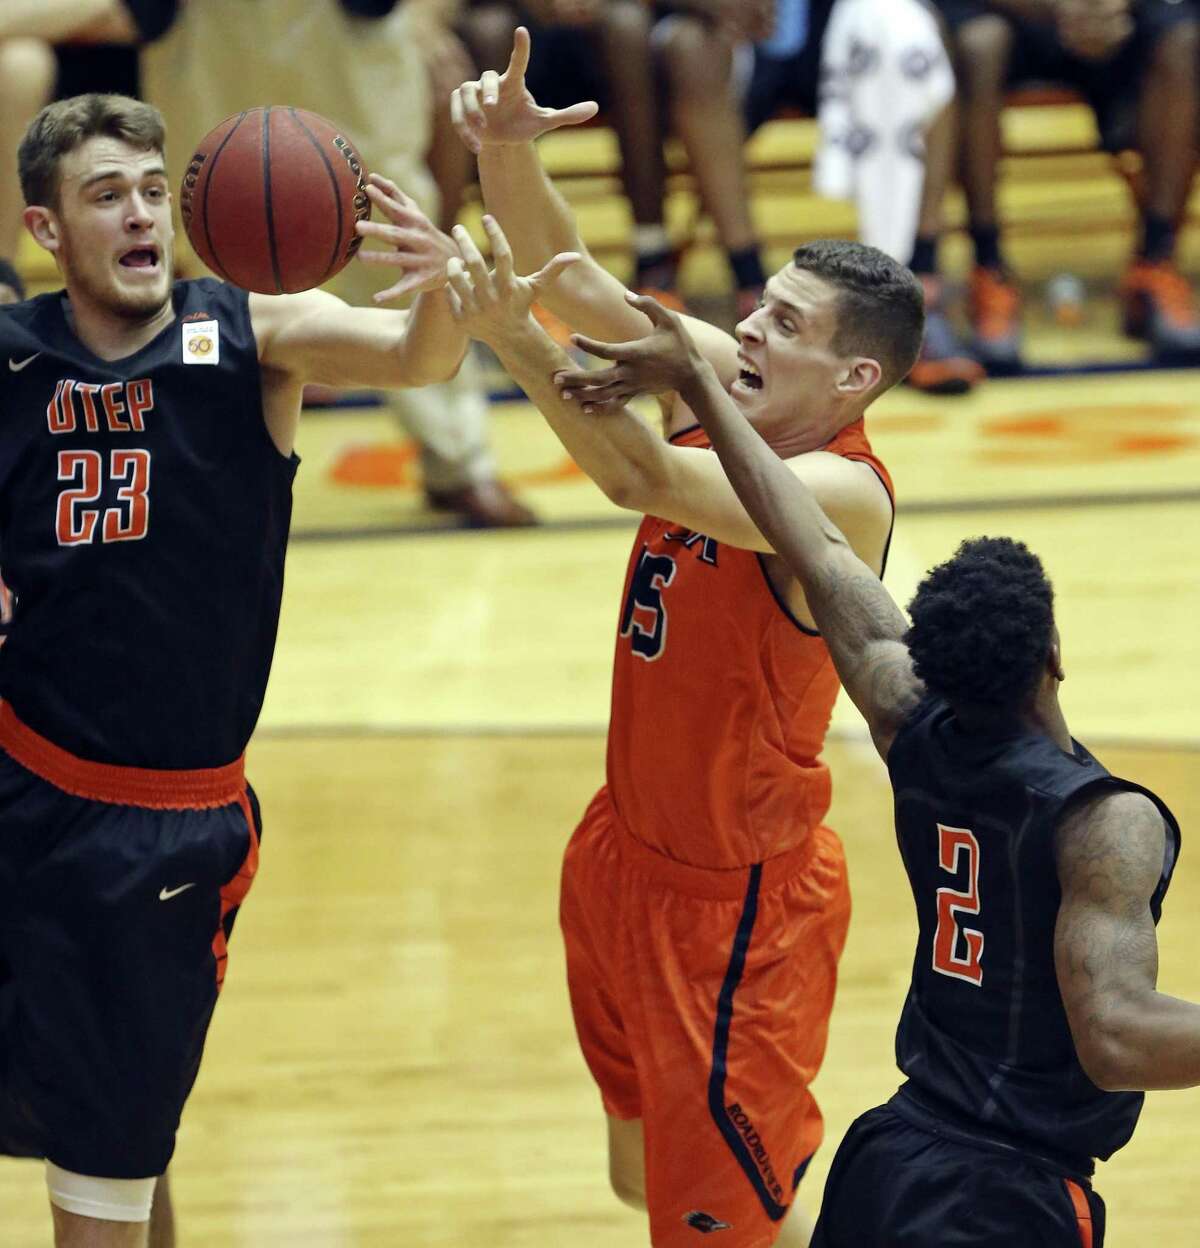 UTSA’s Lucas O’Brien (center) grabs for a rebound between UTEP’s Hooper Vint (left) and Omega Harris during first half action on Jan. 16, 2016 at the Convocation Center.